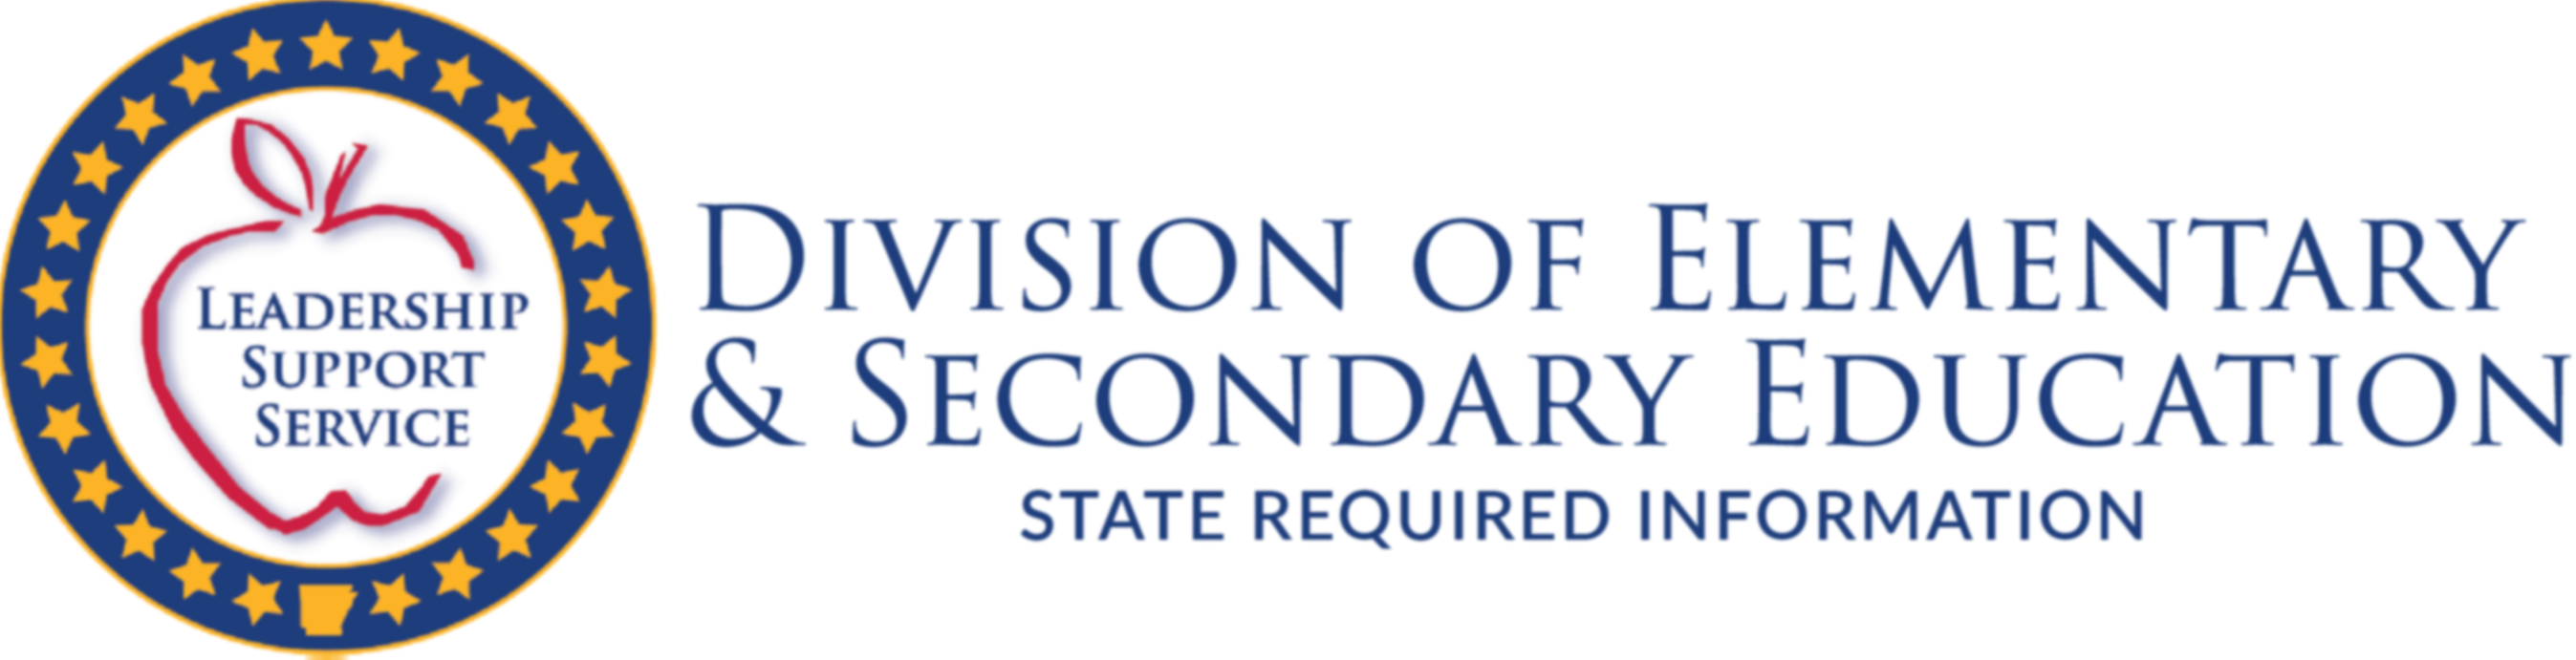 Arkansas Division of Elementary and Secondary Education